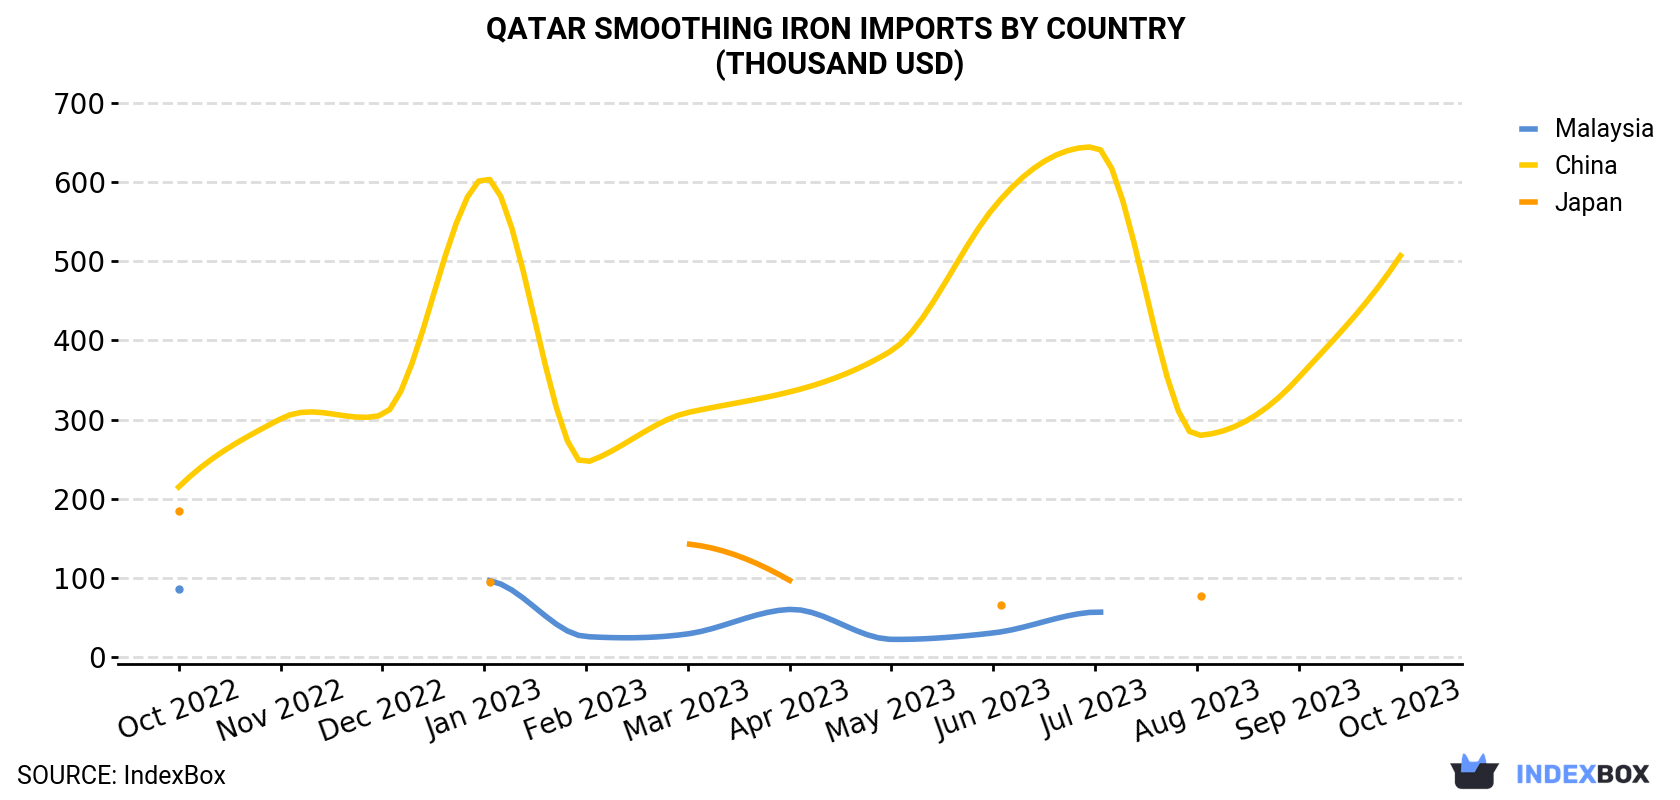 Qatar Smoothing Iron Imports By Country (Thousand USD)